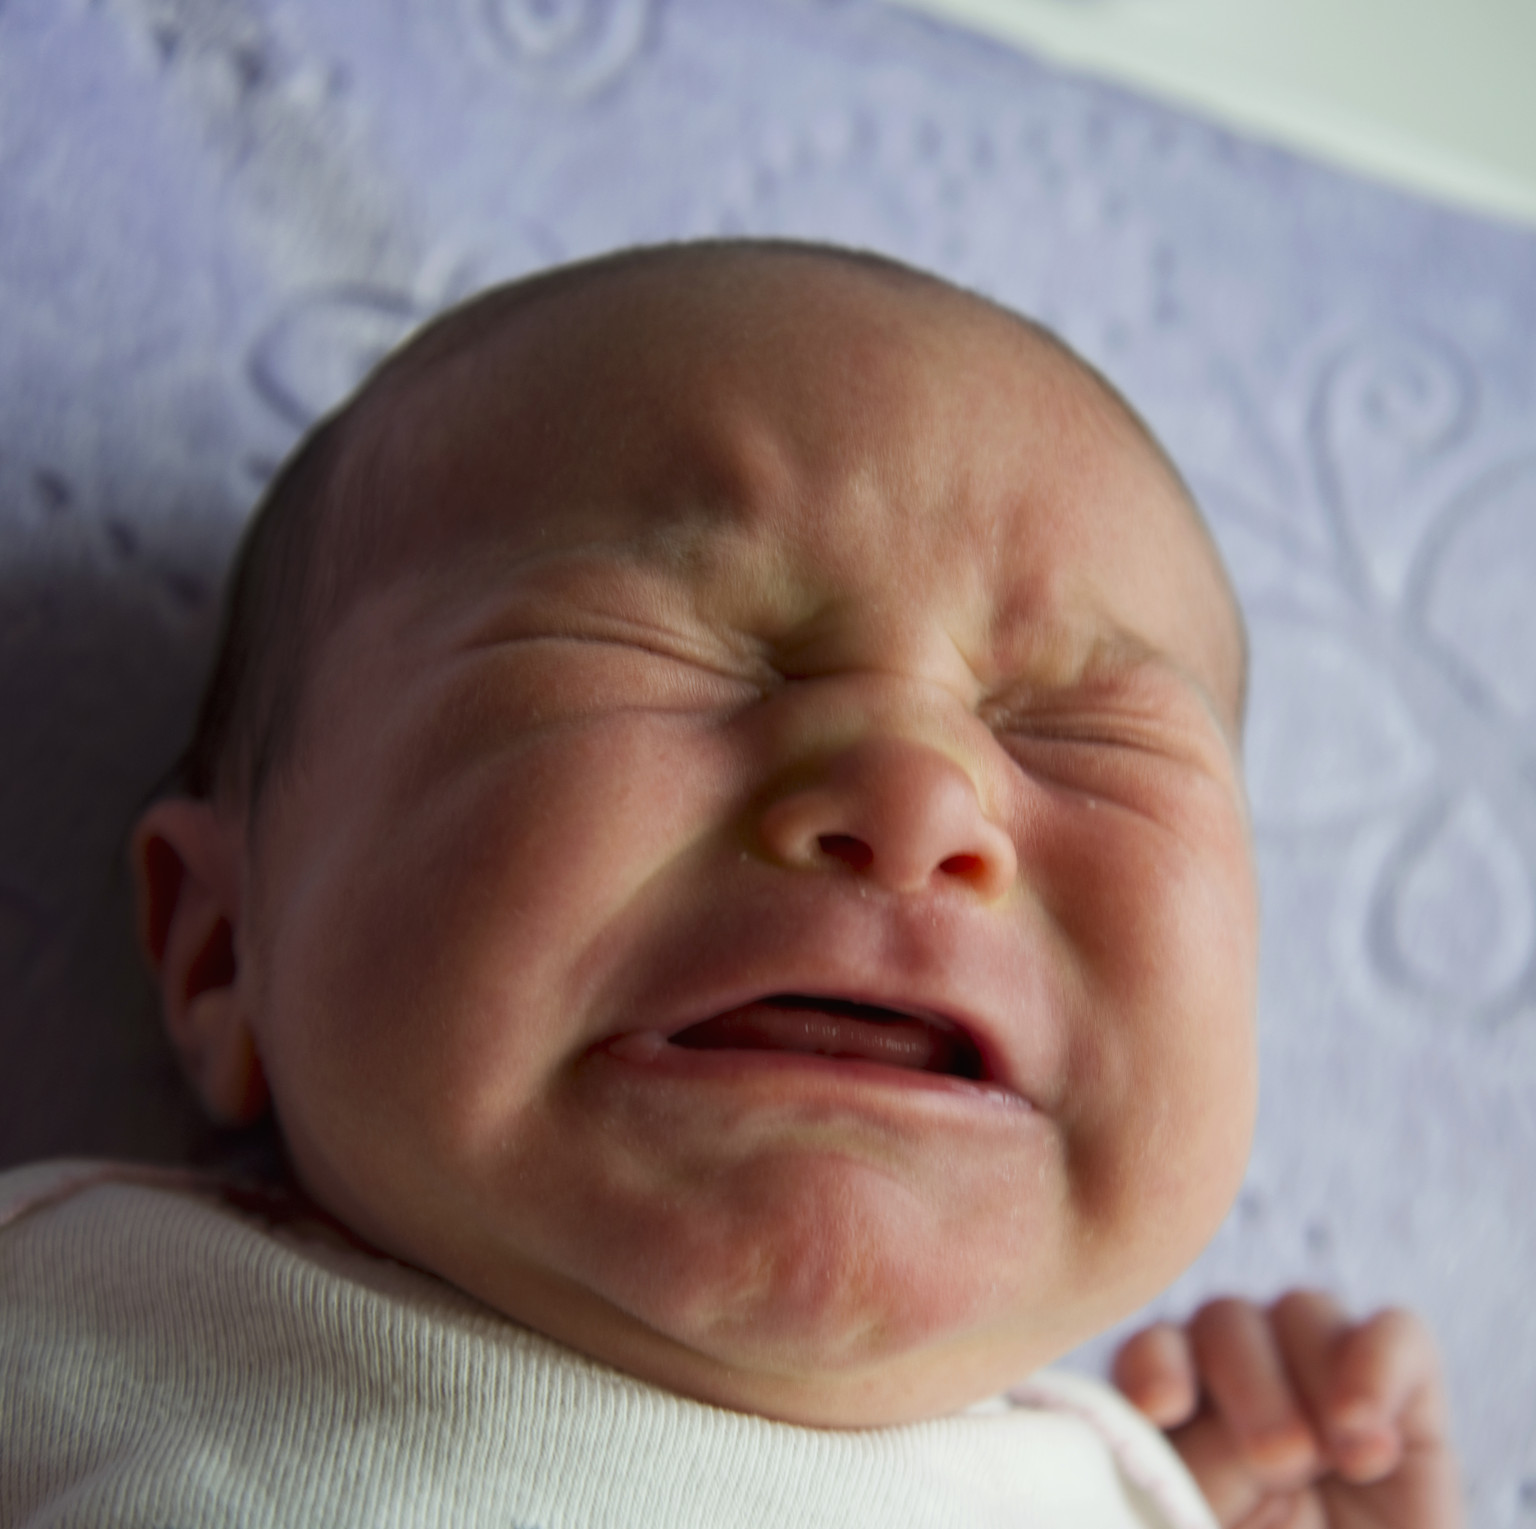 New 'Cry Analyzer' Provides Clues To Babies' Health | HuffPost